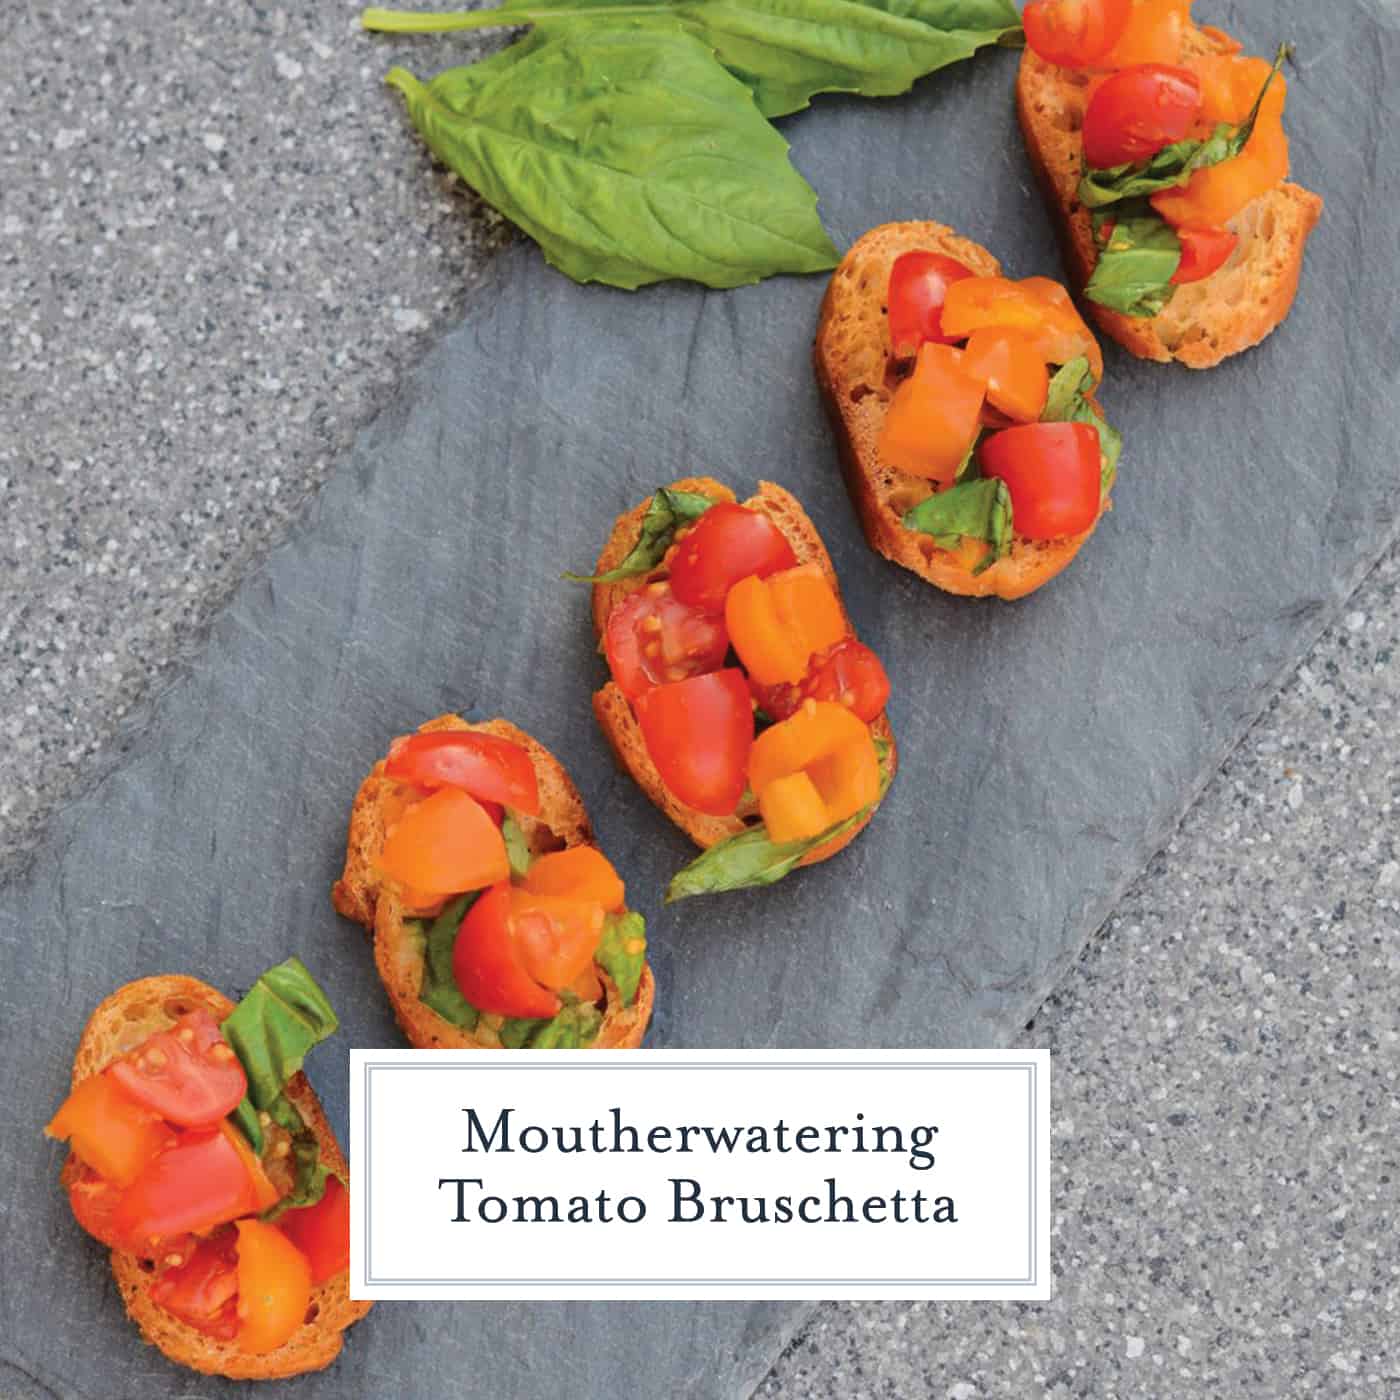 This Tomato Bruschetta recipe is a classic no cook appetizer that can be ready in as little as 20 minutes using fresh tomatoes, basil and garlic. #easybruschetta #tomatobruschetta www.savoryexperiments.com